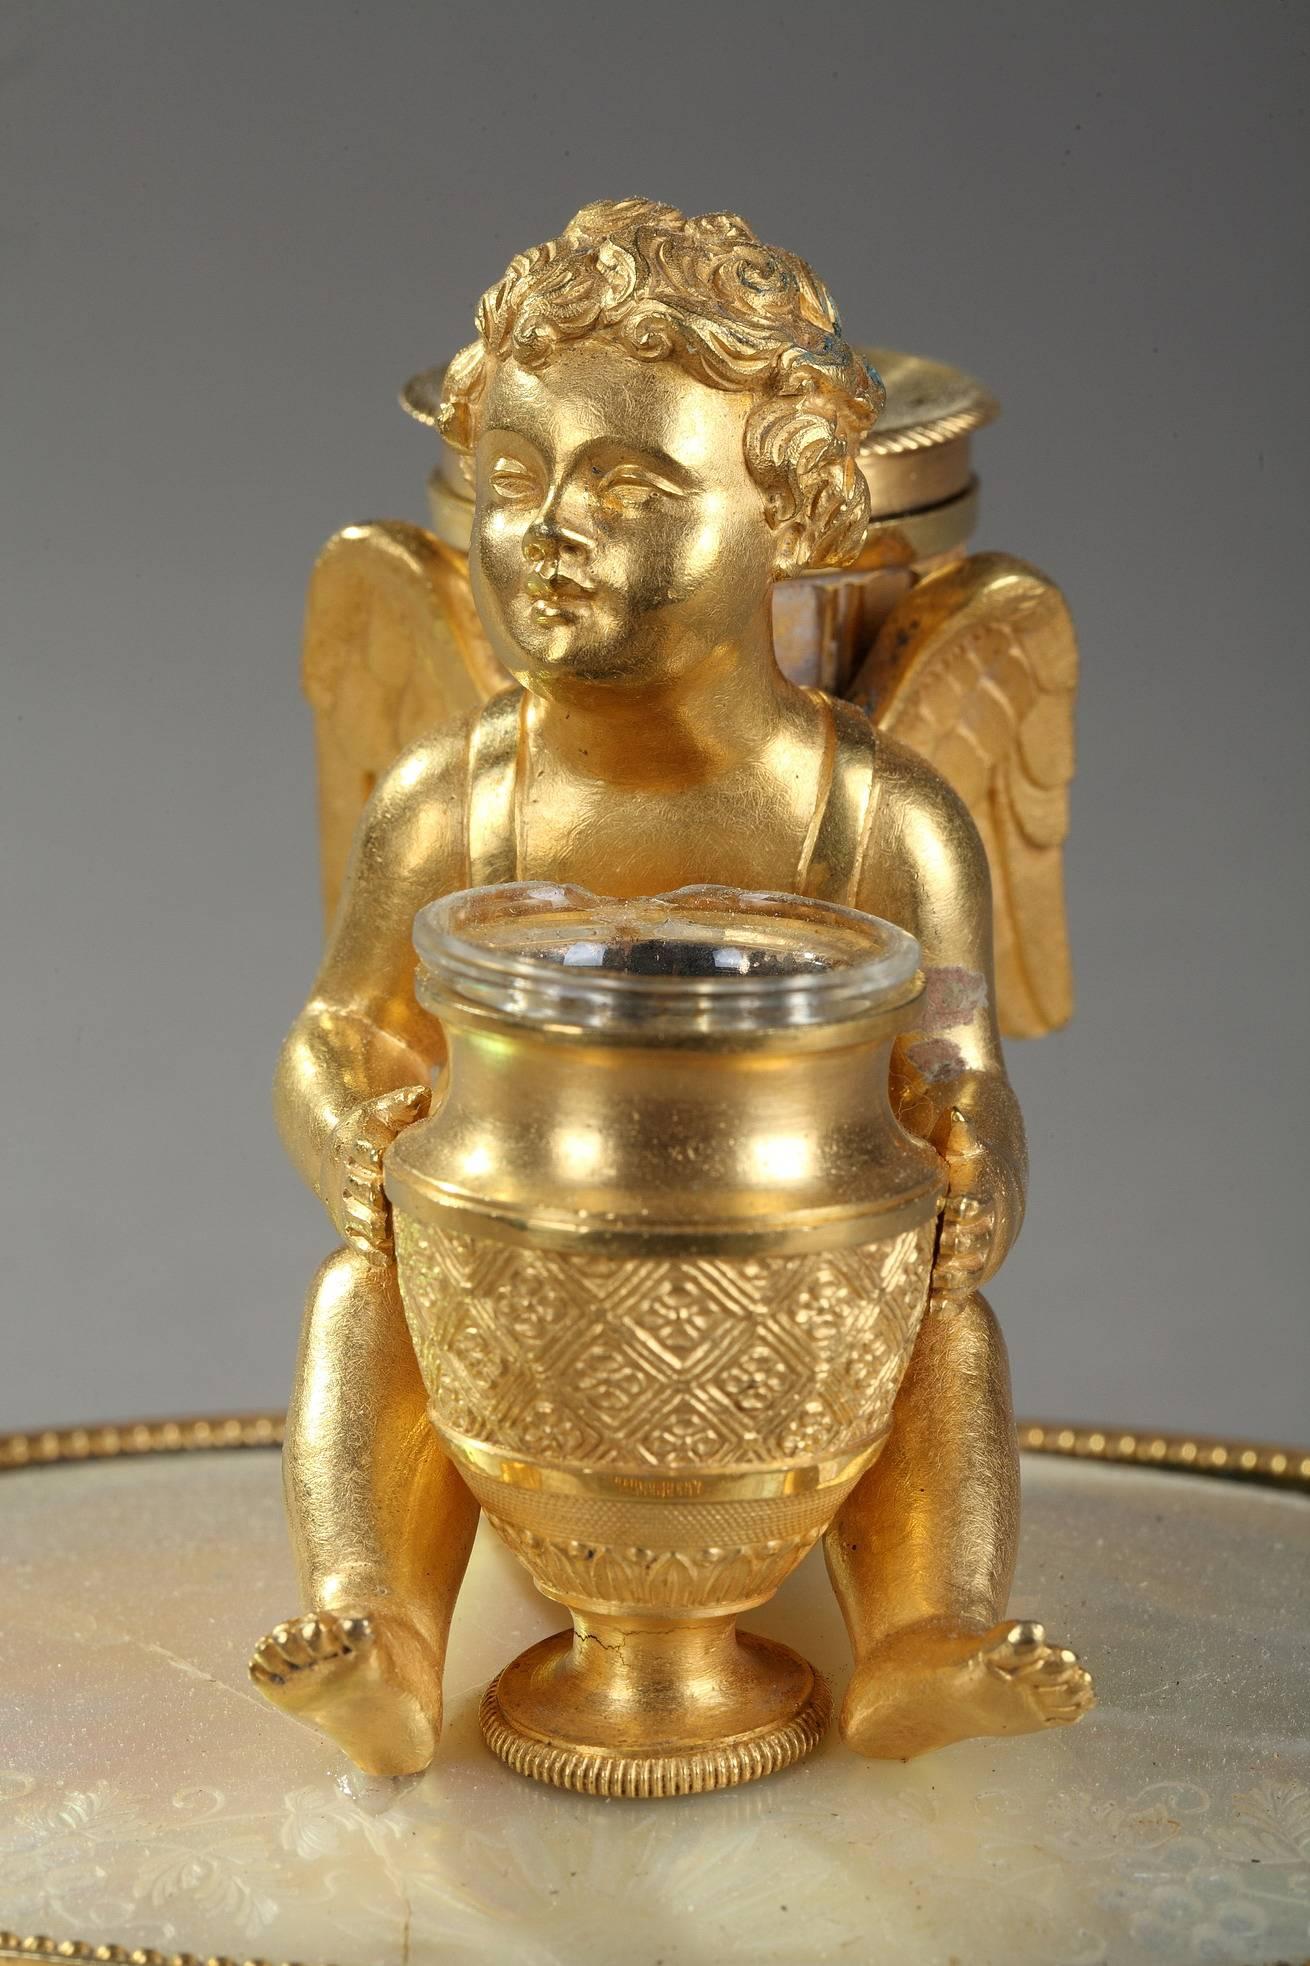 Interesting gilt and chiseled bronze inkstand featuring a winged Cupid holding an urn serving as inkwell (with its original glass), and wearing the quiver with a sandbox. He is resting on a circular, mother-of-pearl base that is engraved with